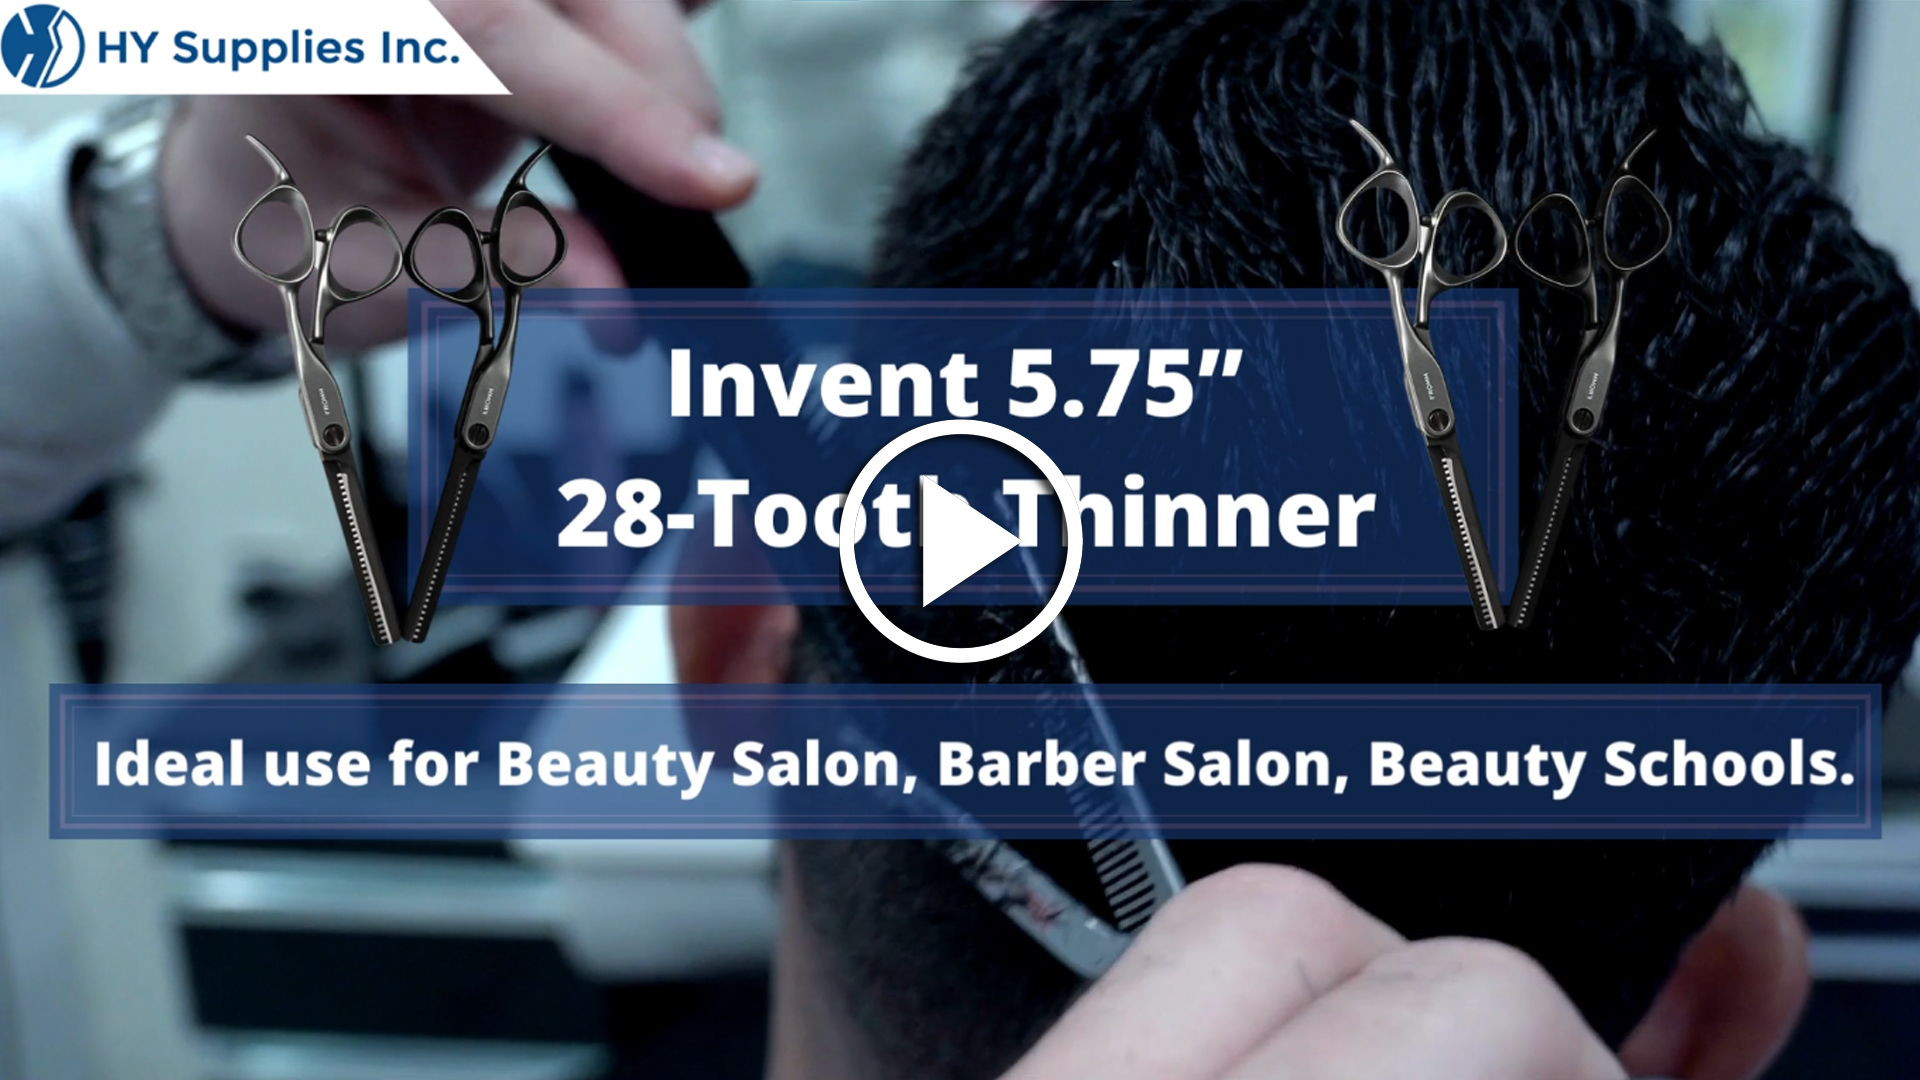 Invent 5.75” 28-Tooth Thinner